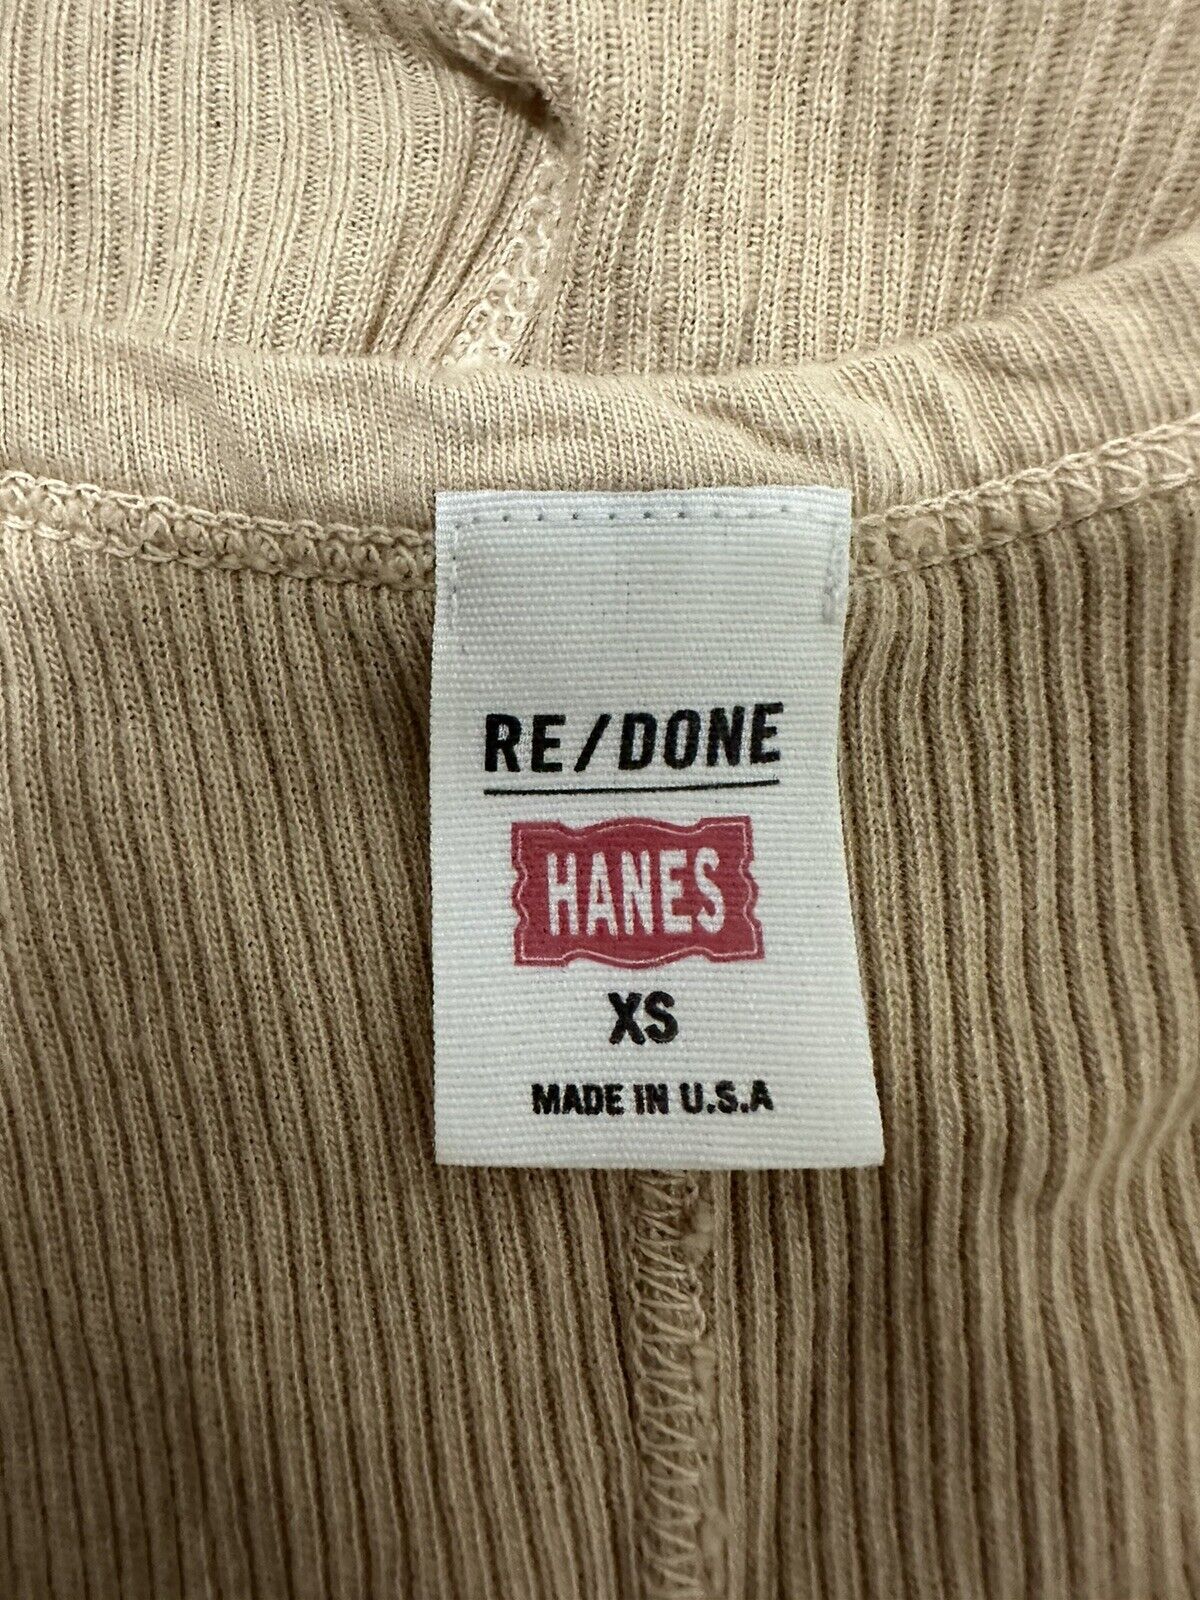 RE/DONE X HANES RIBBED TANK TOP SIZE XS